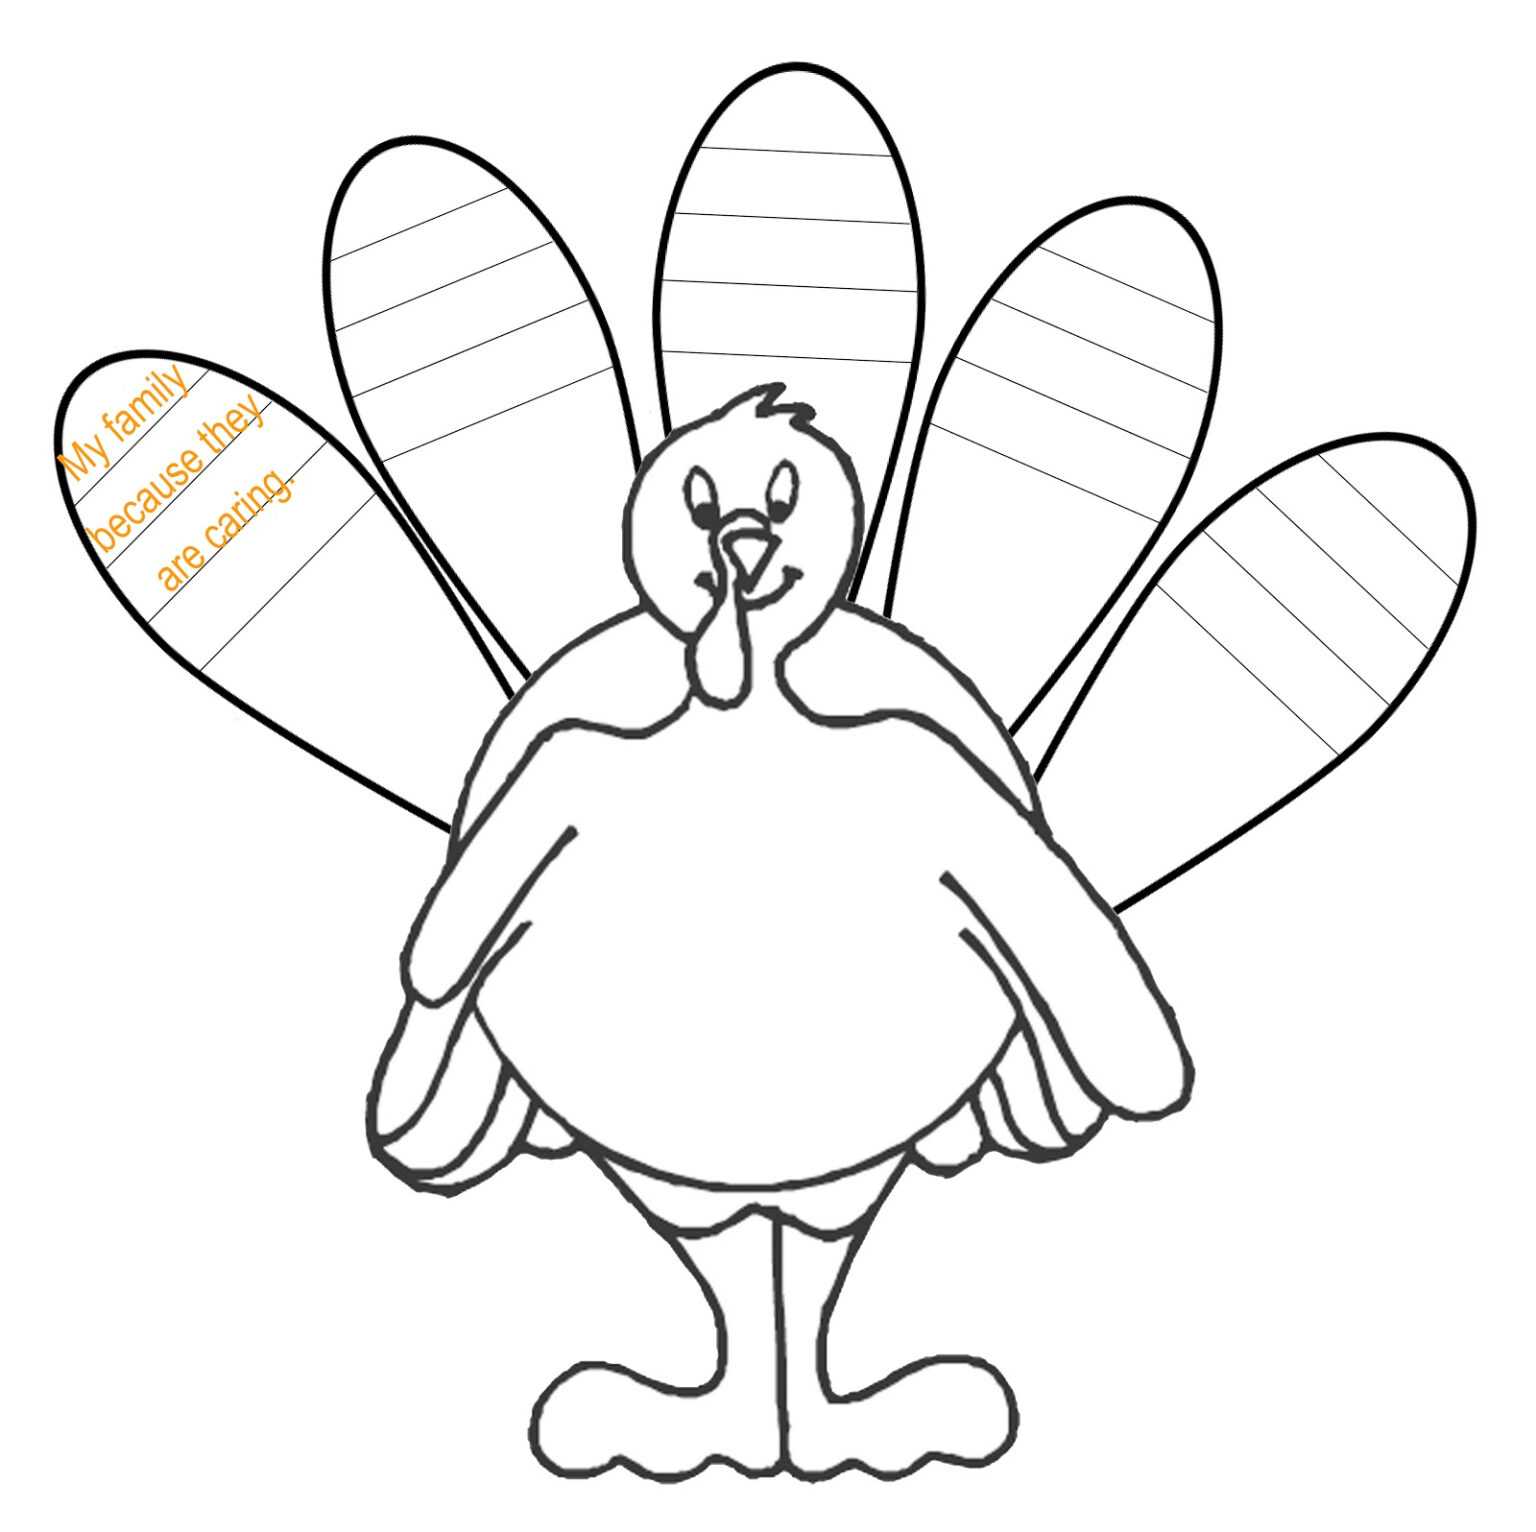 turkey-clip-art-coloring-page-picture-4554-turkey-clip-art-in-blank